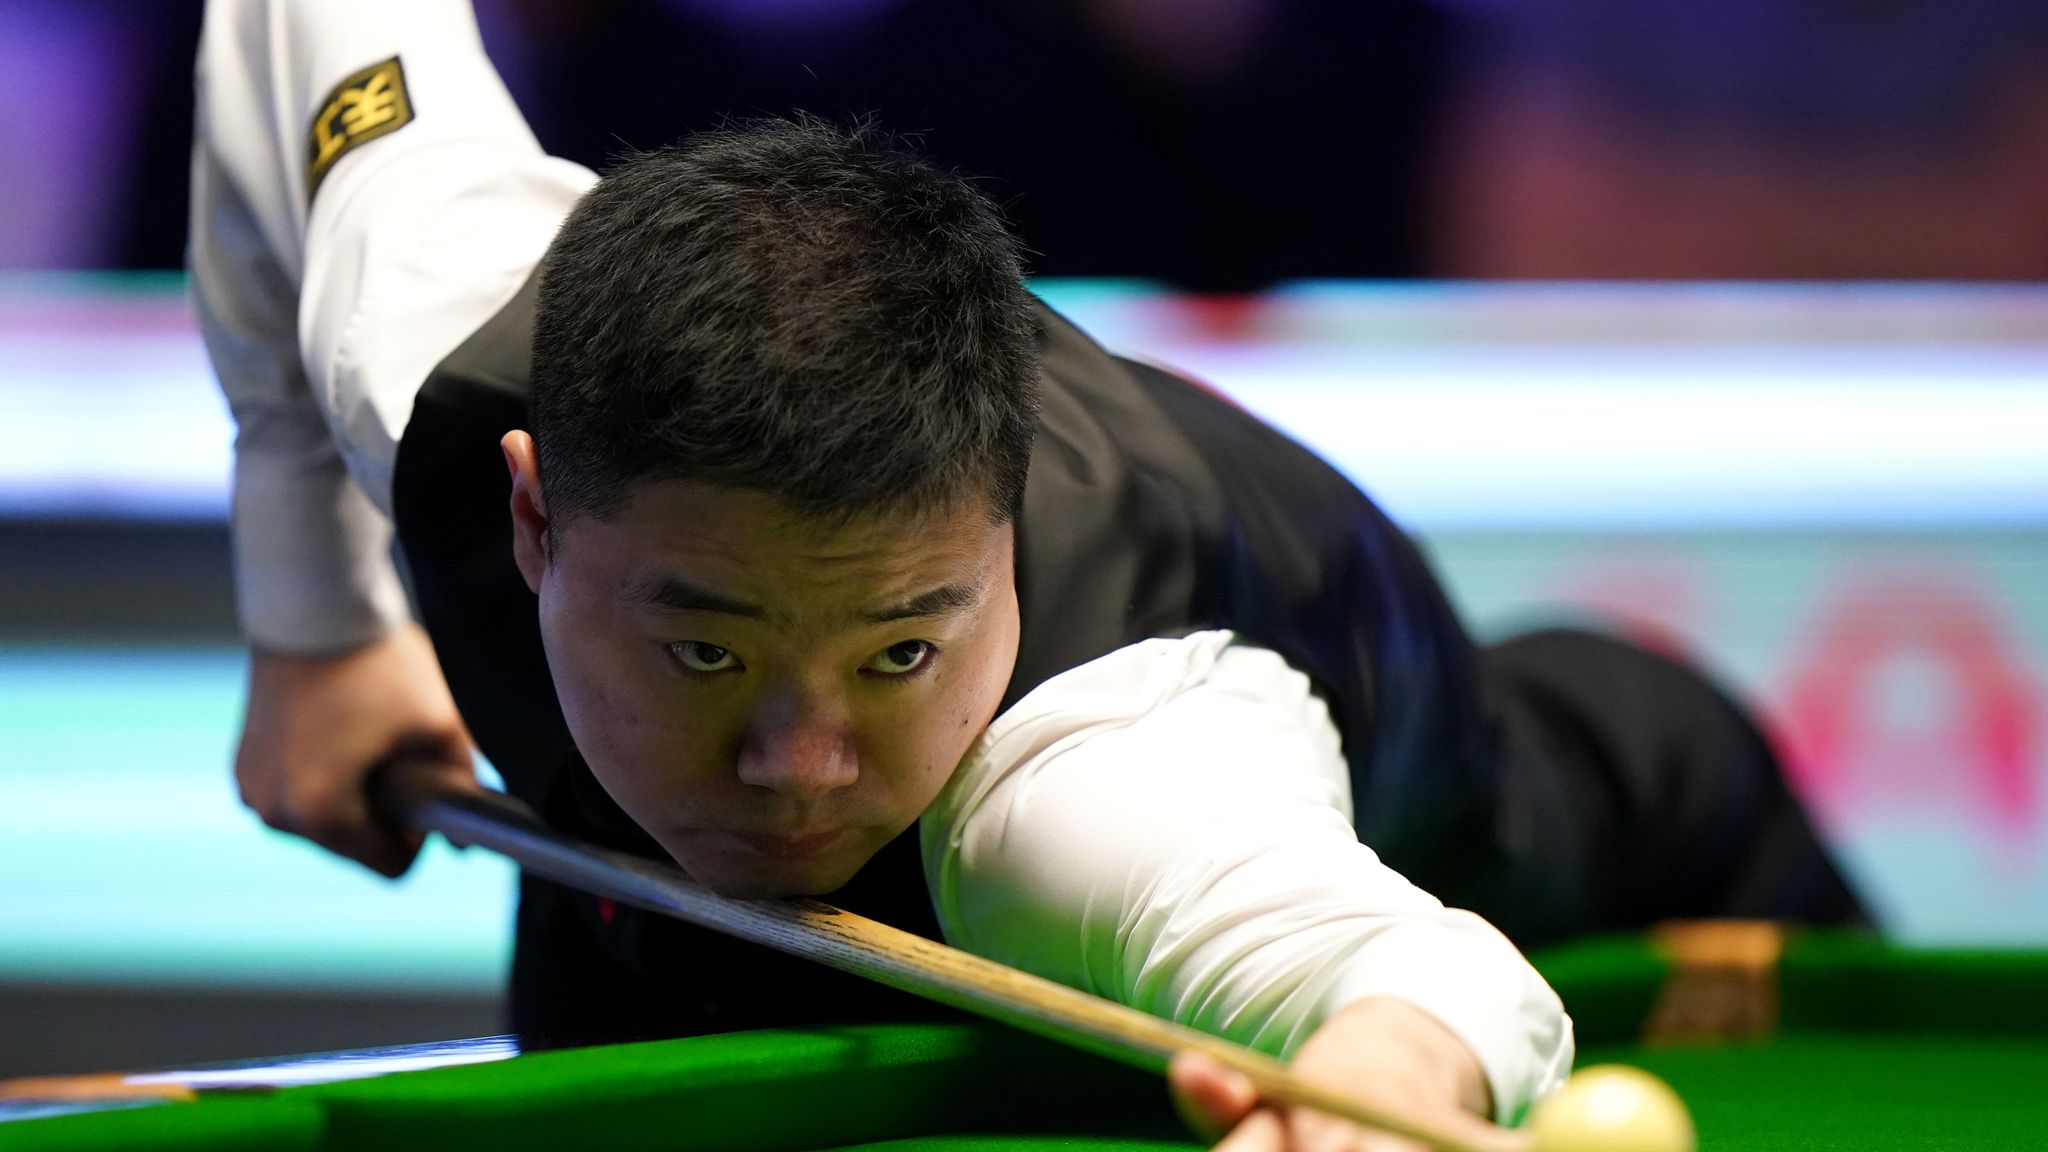 UK Championship Ronnie OSullivan thrashed 6-0 by Ding Junhui in quarter-finals in York Snooker News Sky Sports